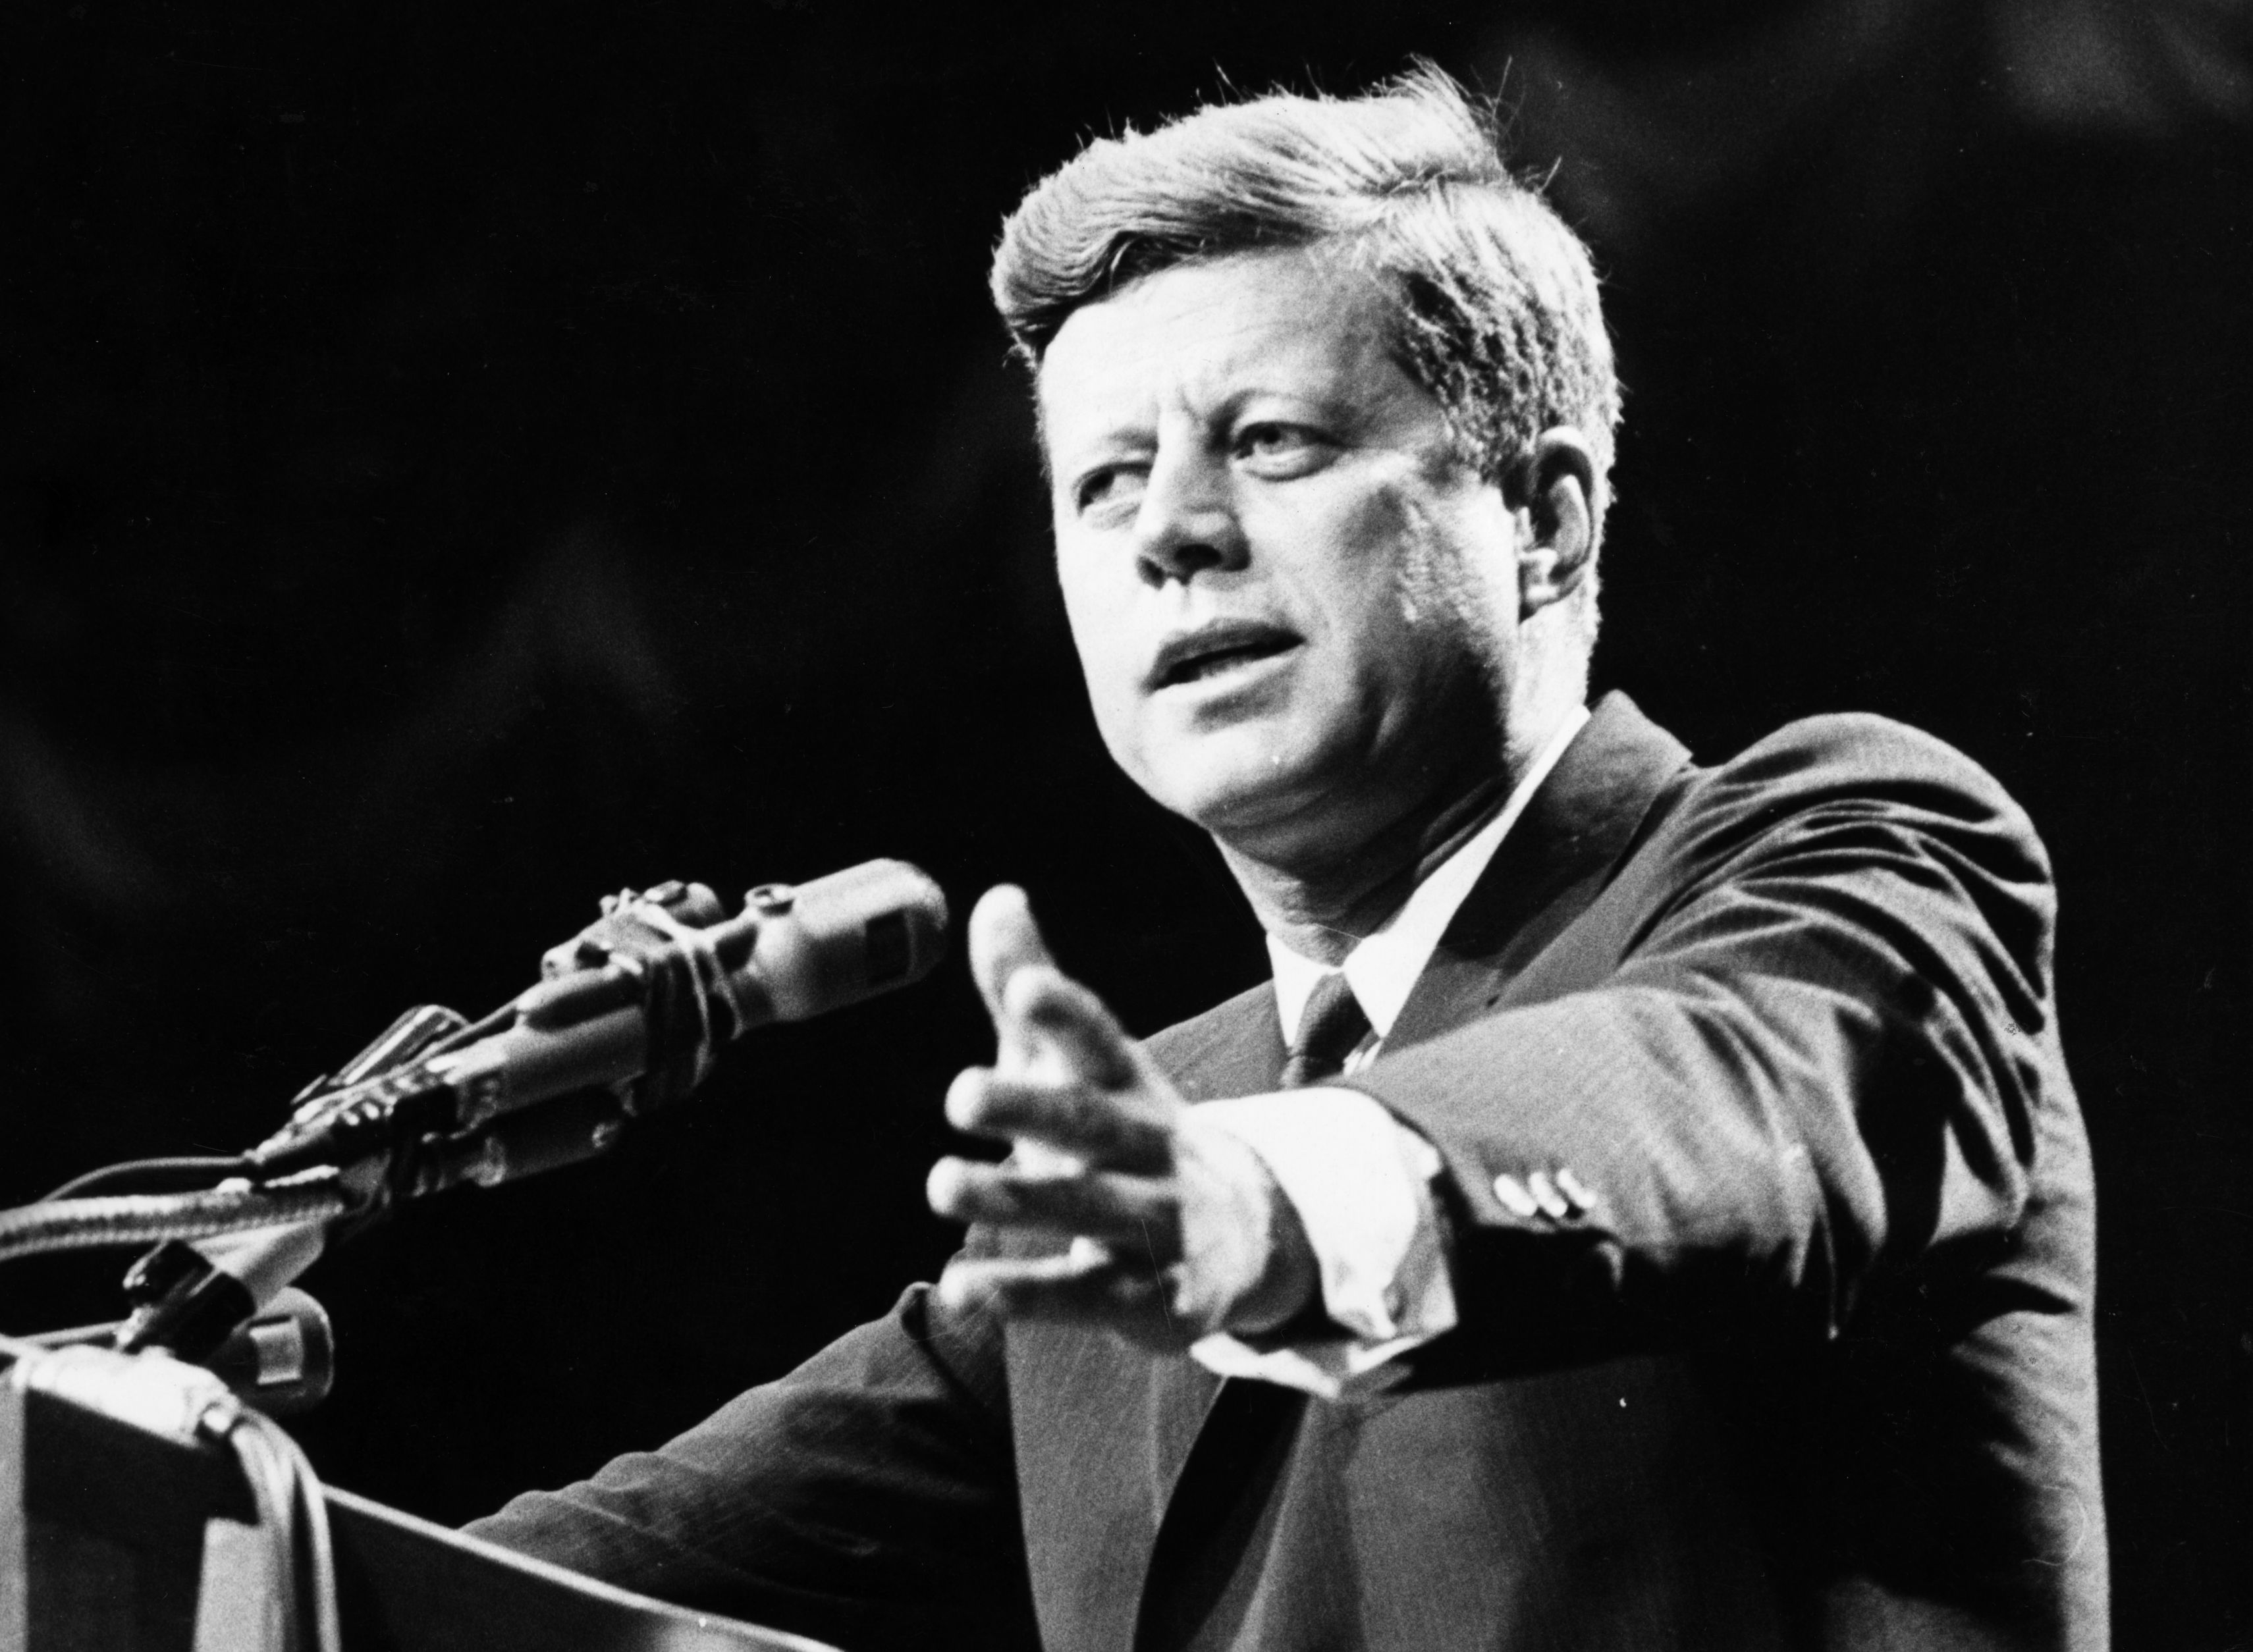 The Life and Public Assassination of President John F. Kennedy by the CIA